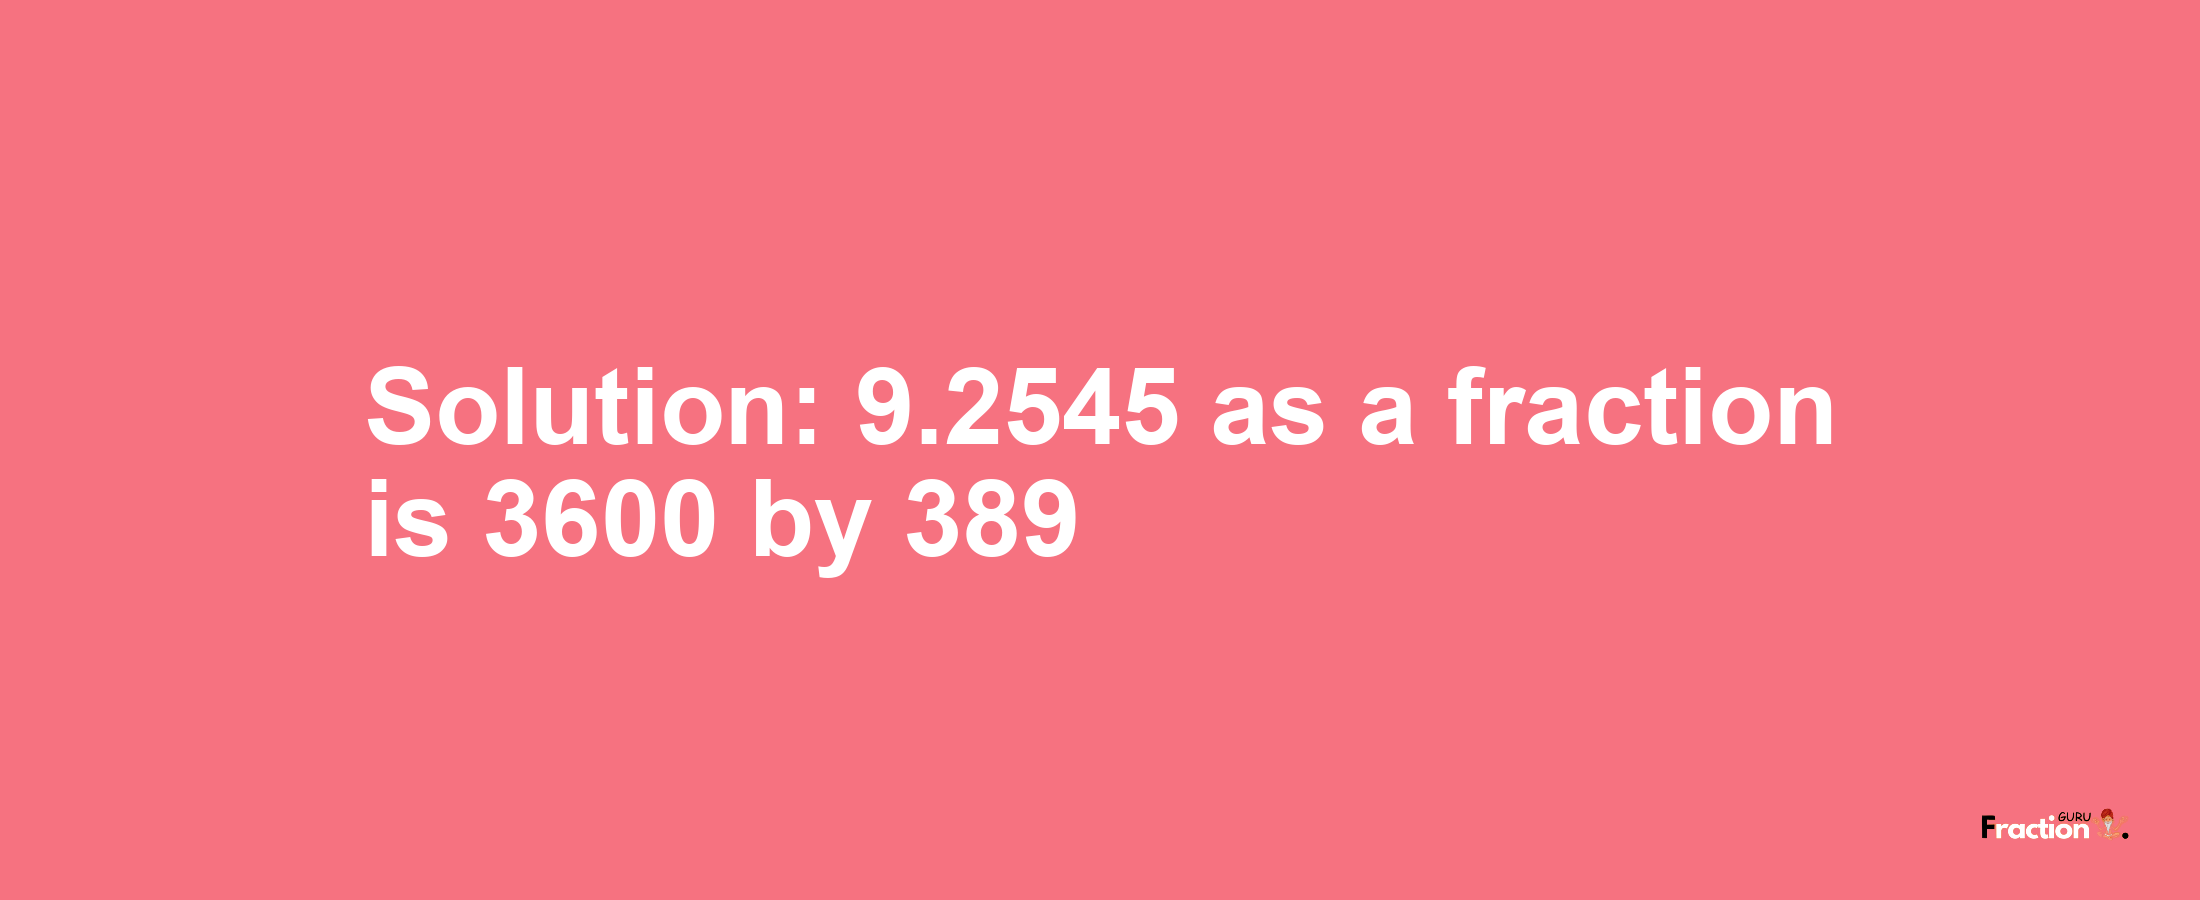 Solution:9.2545 as a fraction is 3600/389